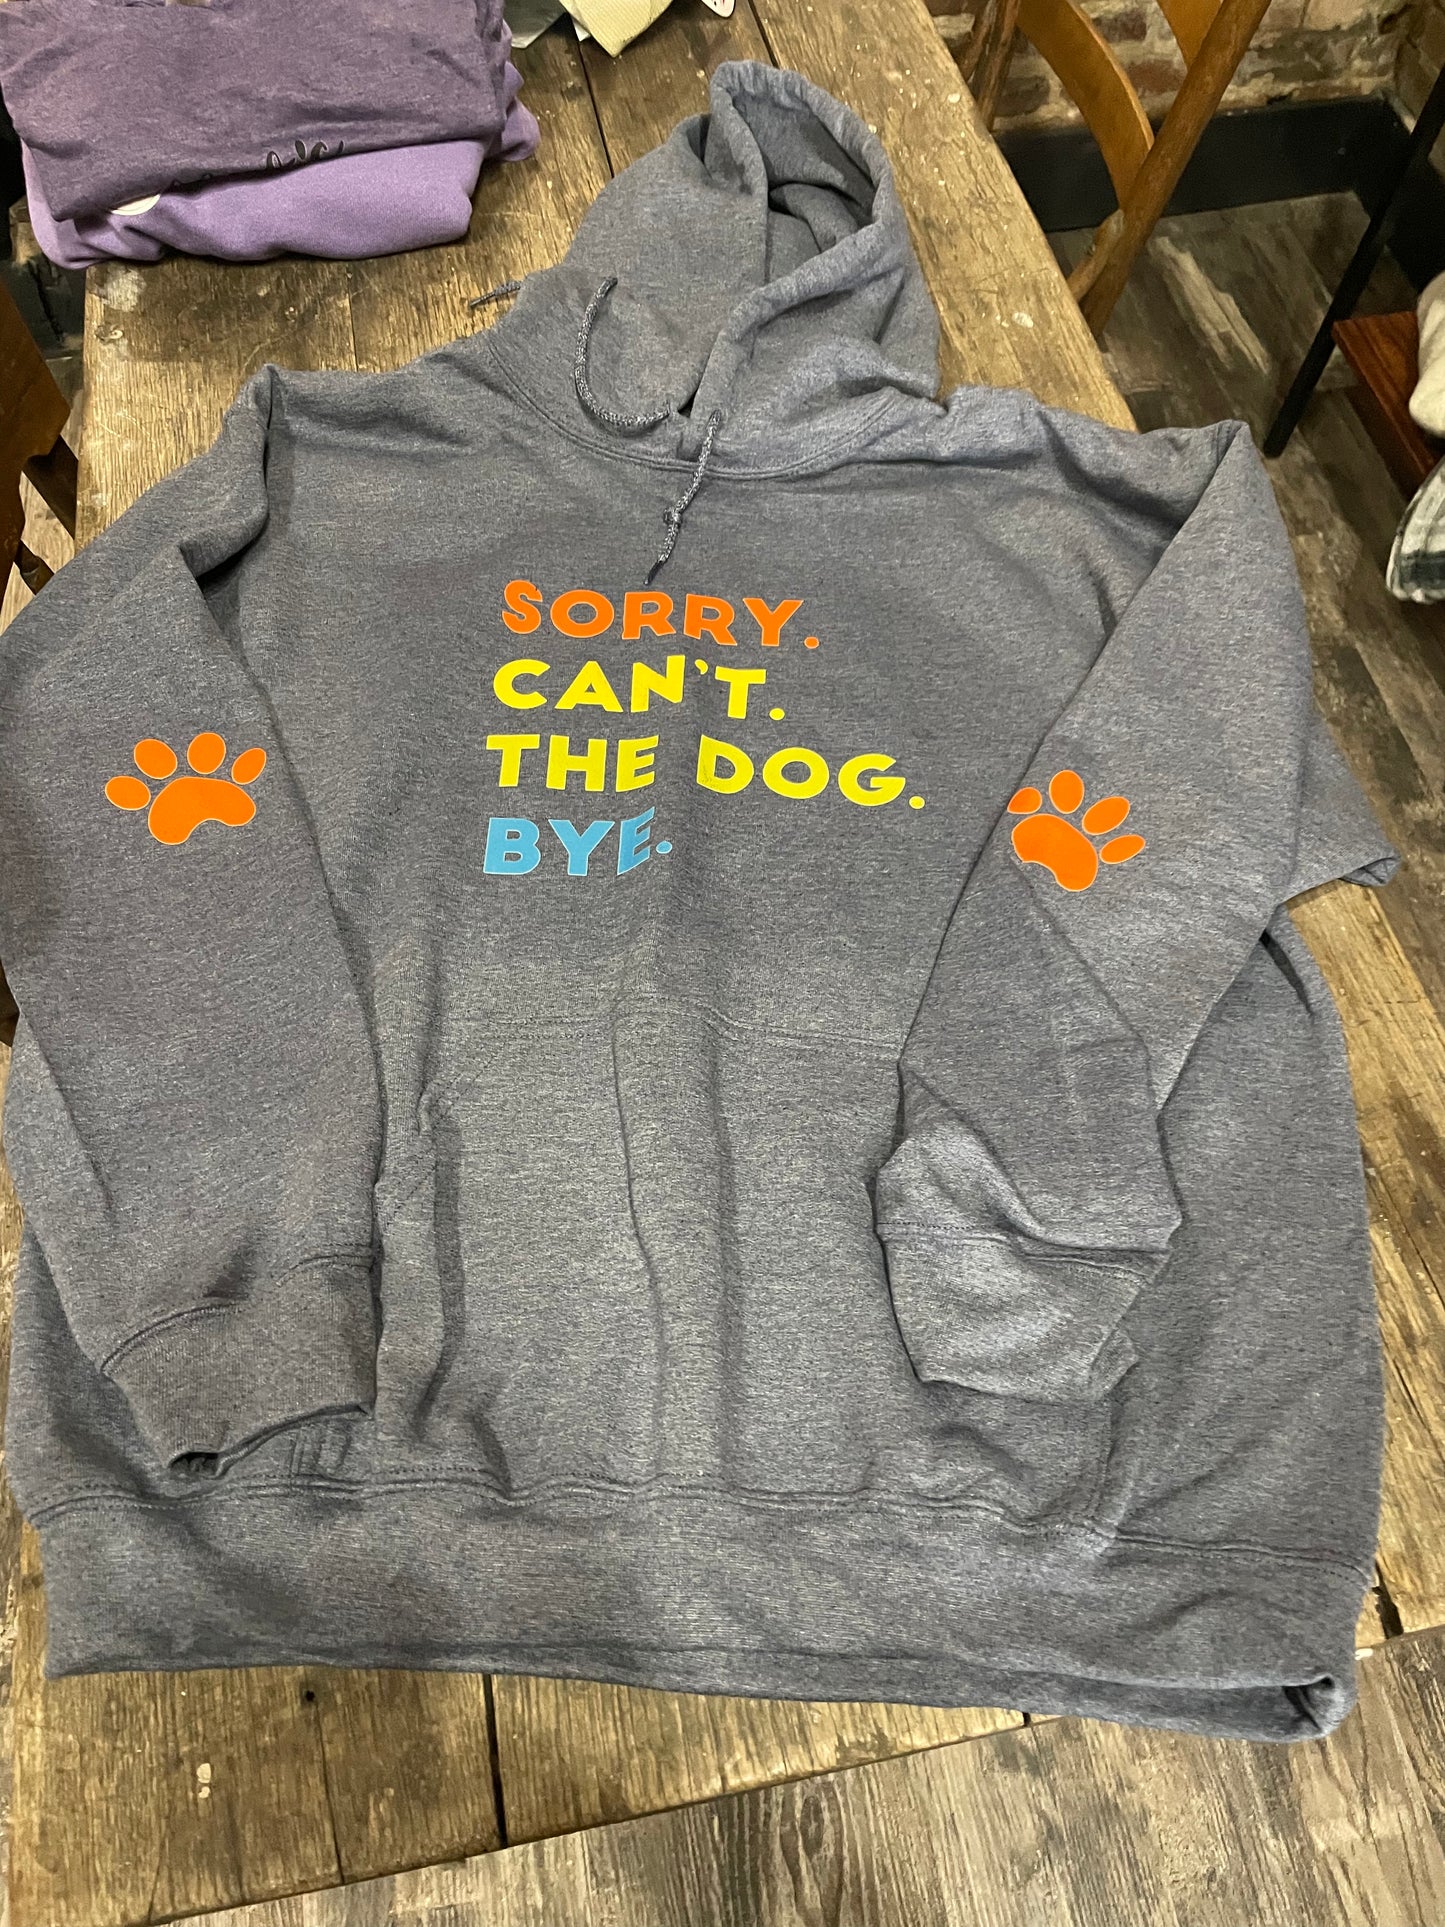 Sorry. Can’t. The Dog. Bye. Hoodie